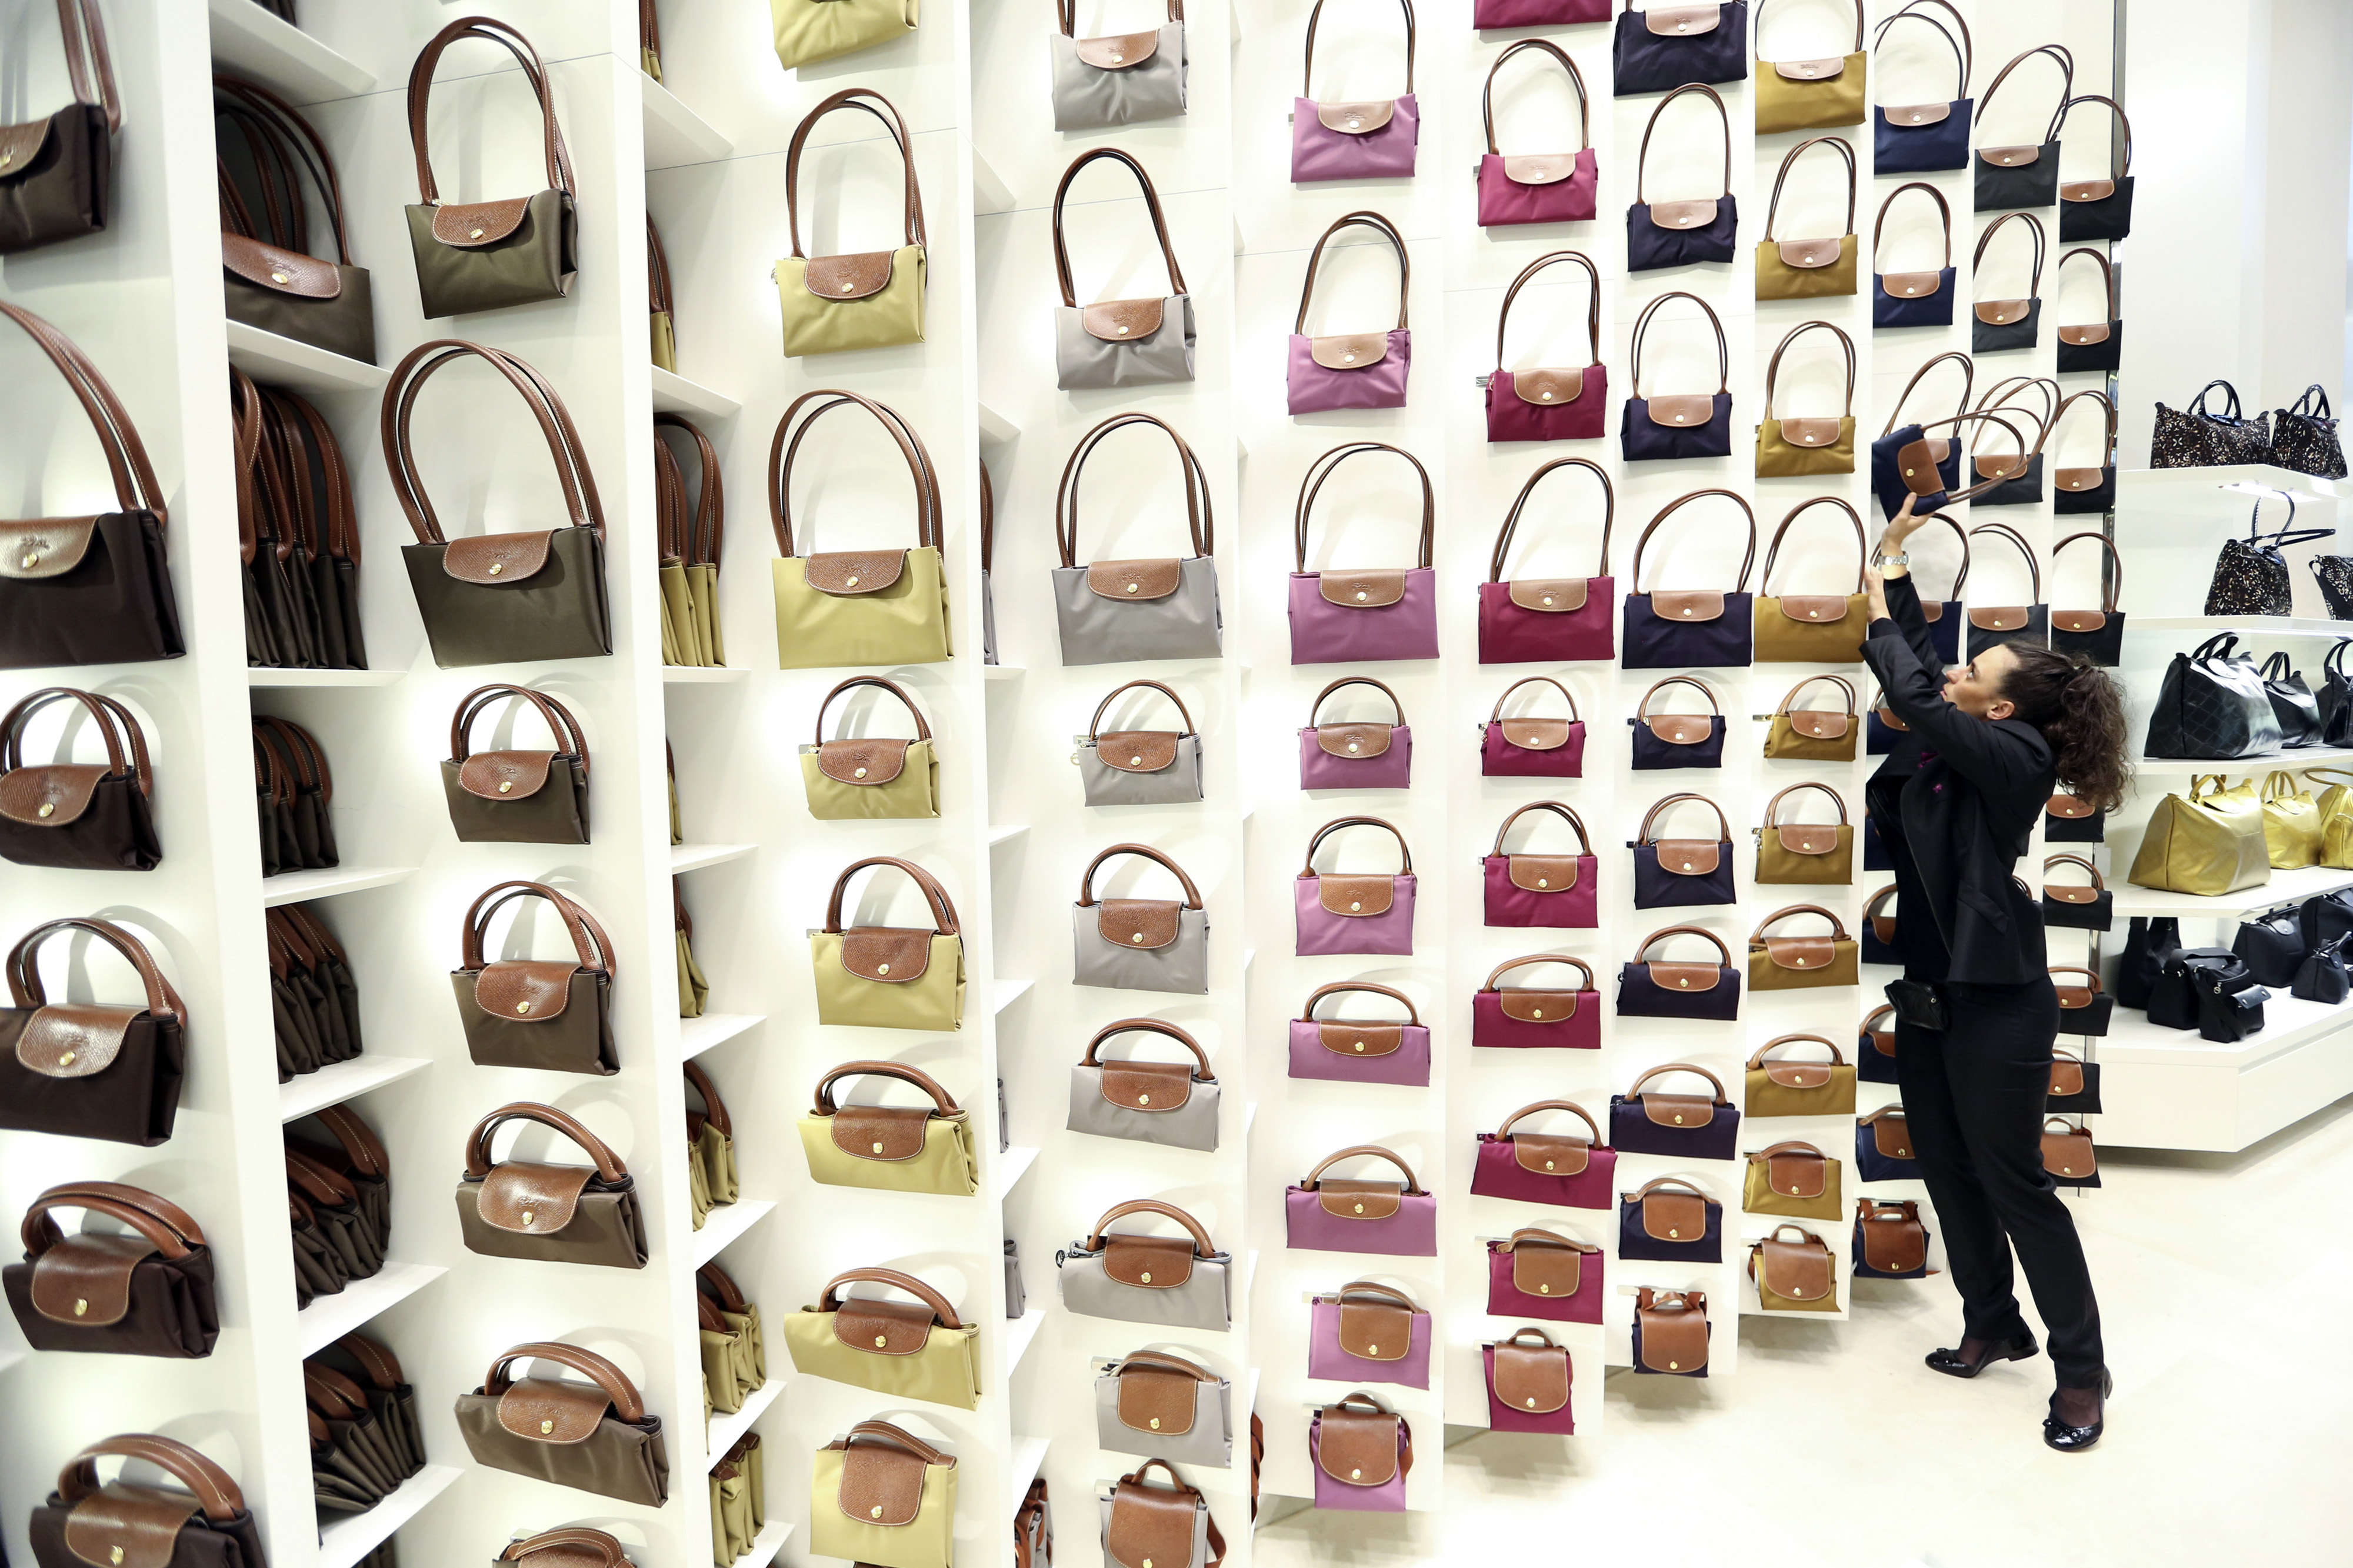 Longchamp outpaces Vuitton with value-for-money luxury - The